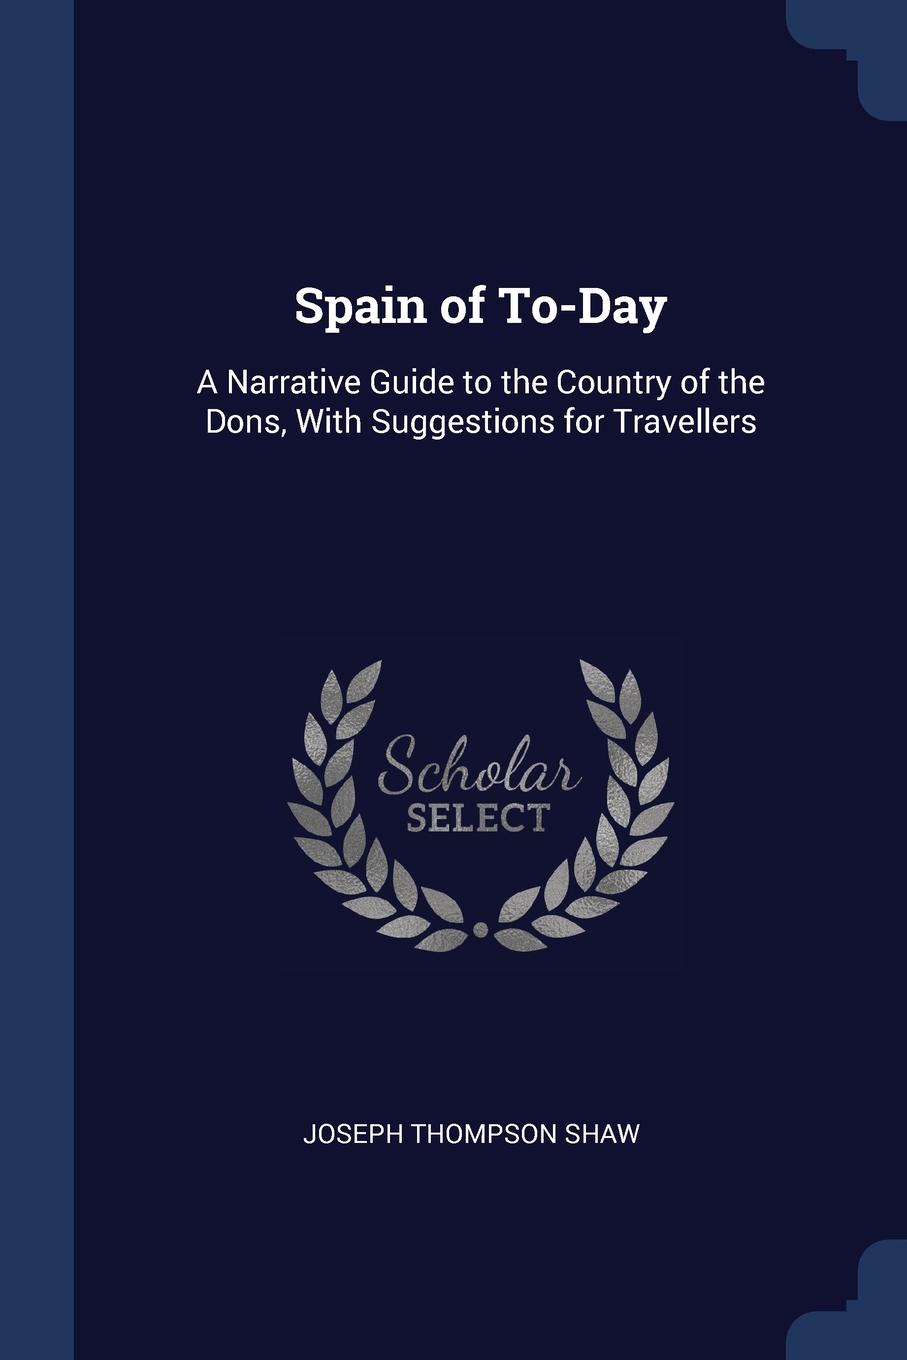 Spain of To-Day. A Narrative Guide to the Country of the Dons, With Suggestions for Travellers